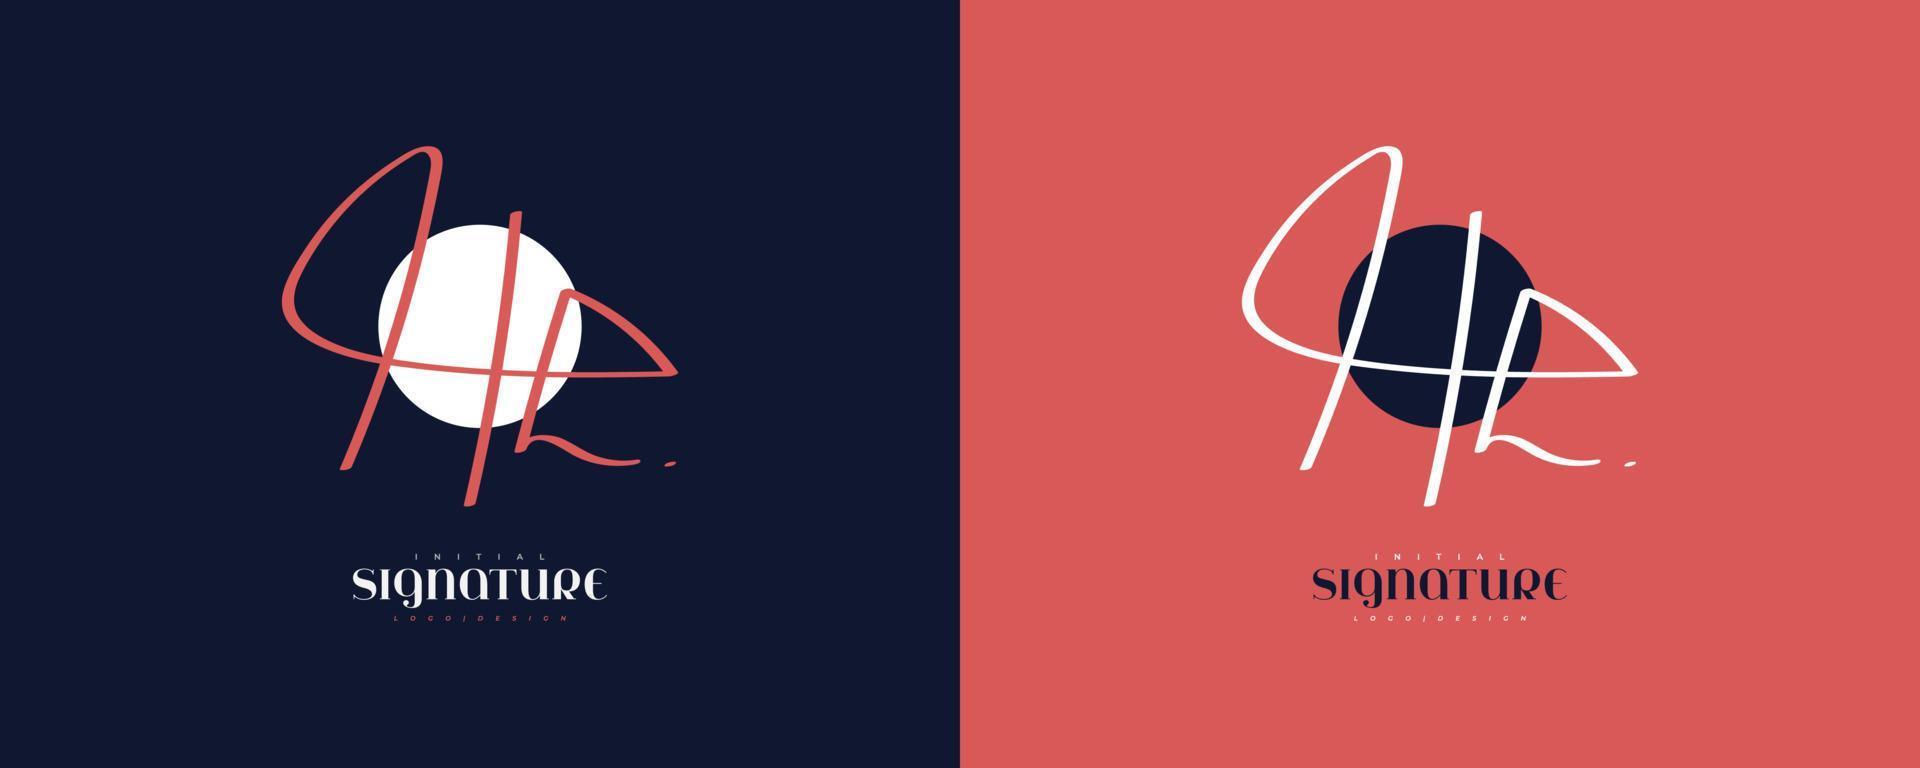 Minimal H and H Logo Design with Handwriting Style. HH Signature Logo or Symbol vector